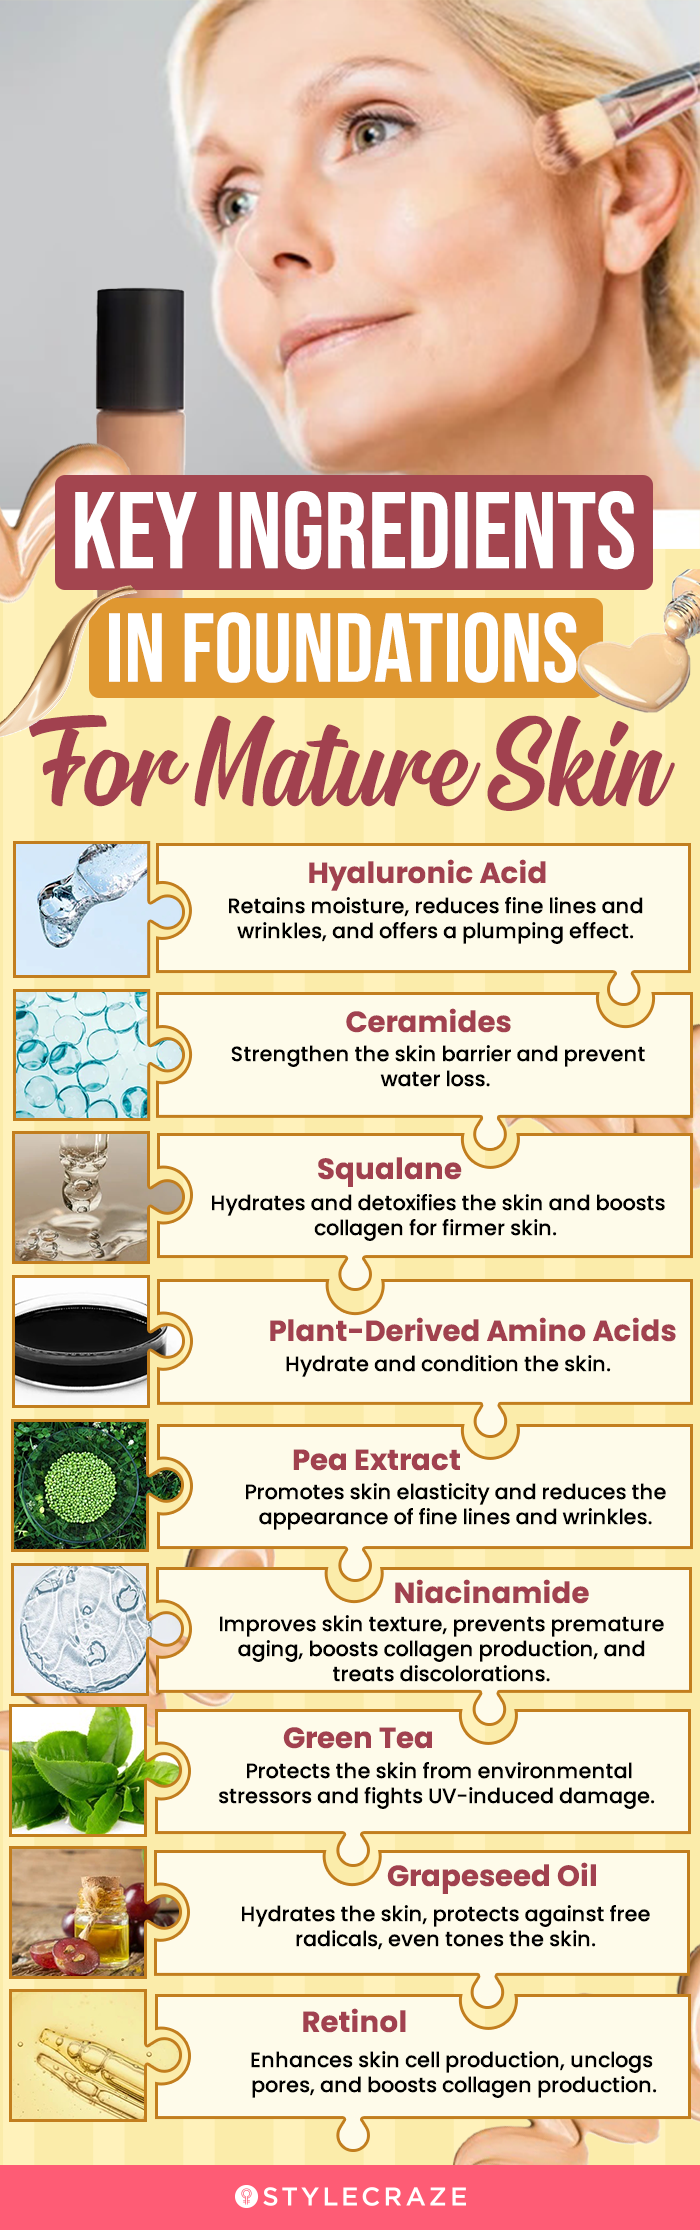 Key Ingredients In Foundations For Mature Skin (infographic)